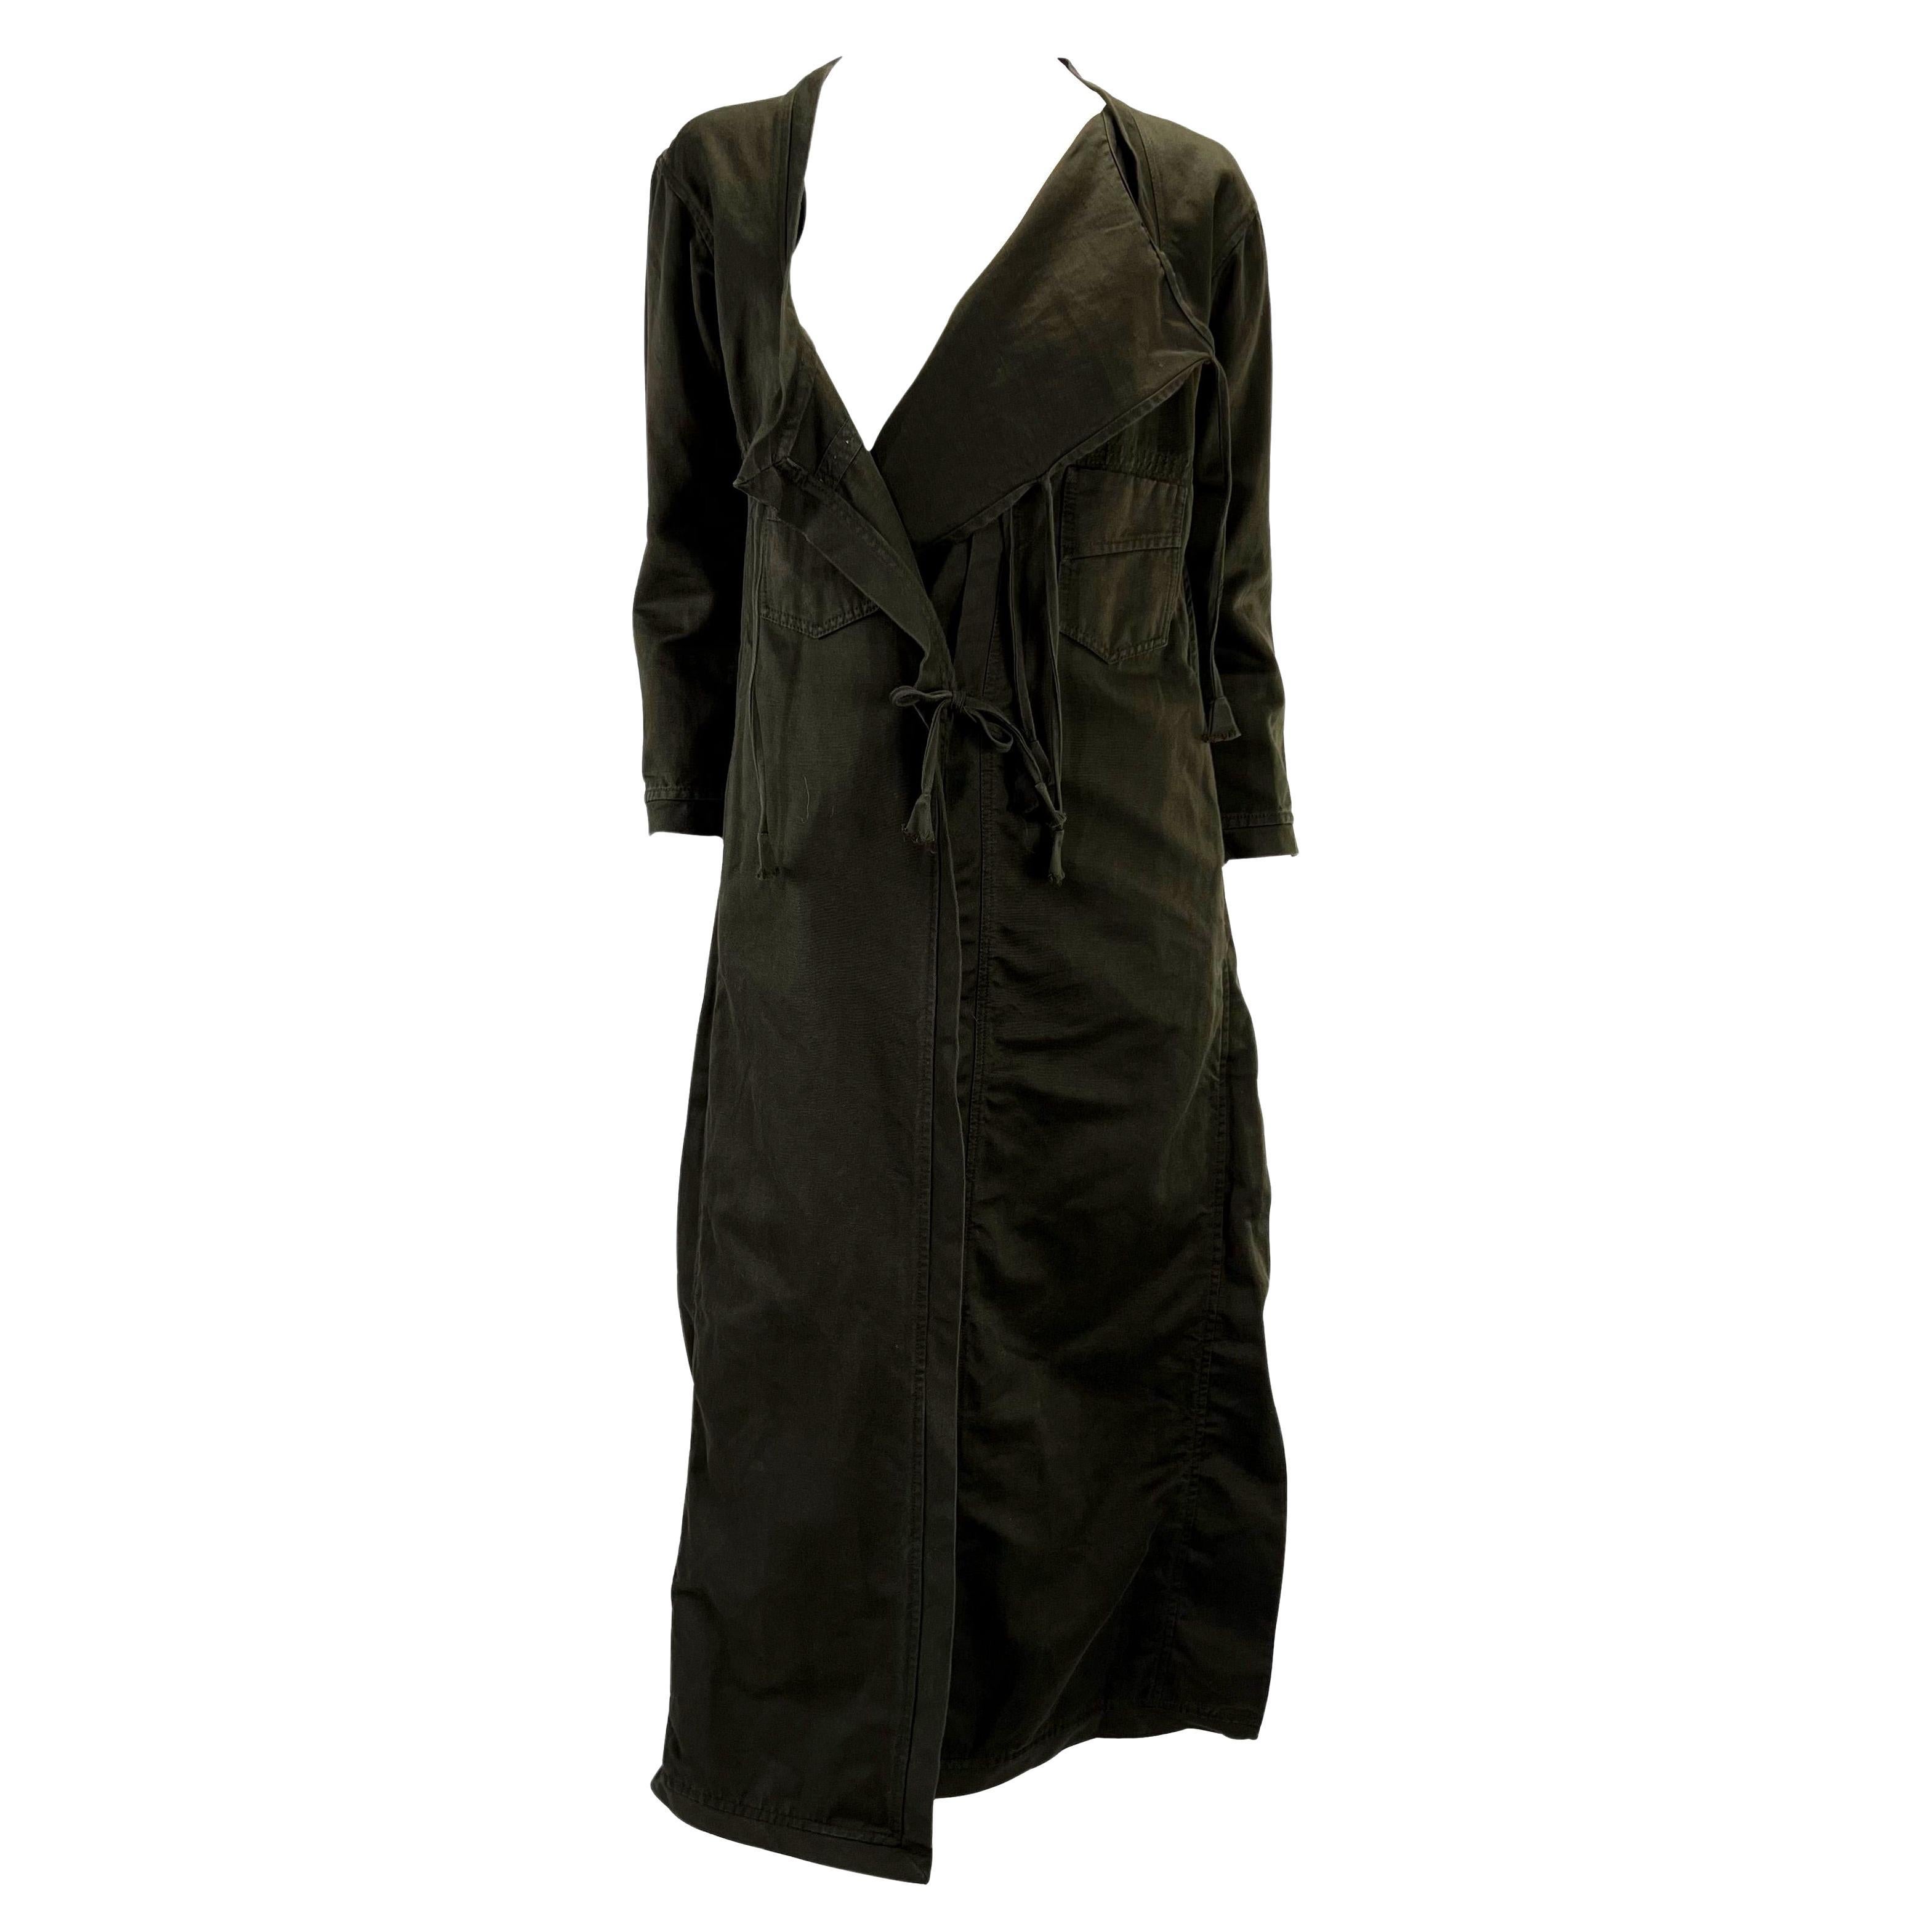 S/S 2002 Gucci by Tom Ford Brown Cotton Oversized Cotton Duster Coat Dress